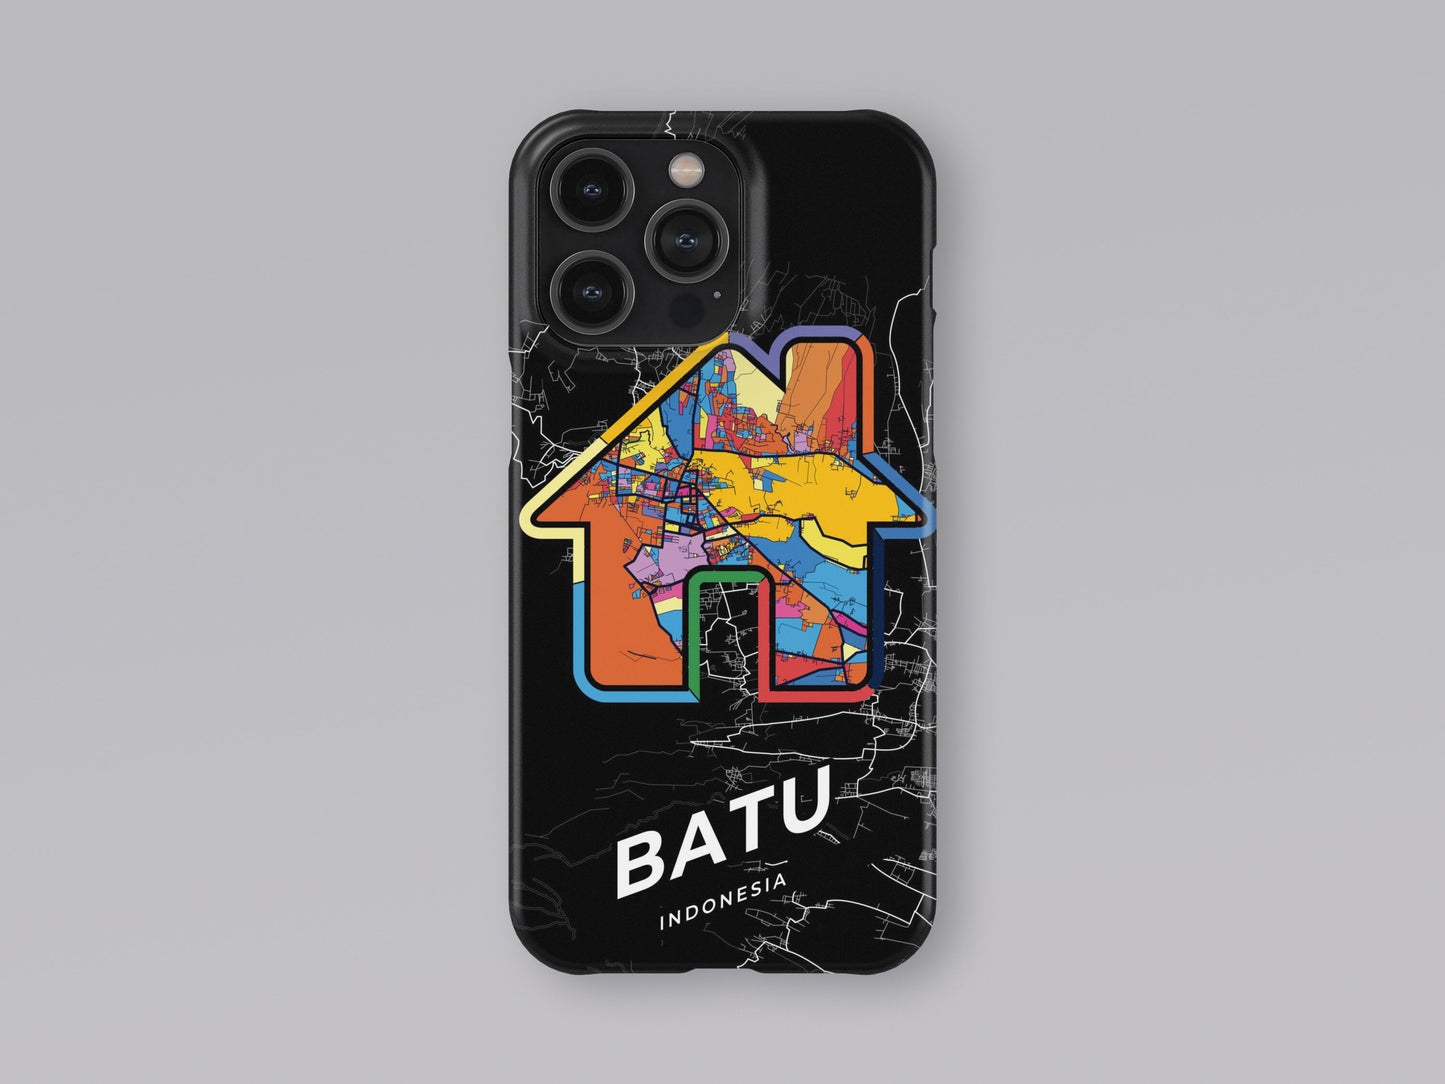 Batu Indonesia slim phone case with colorful icon. Birthday, wedding or housewarming gift. Couple match cases. 3